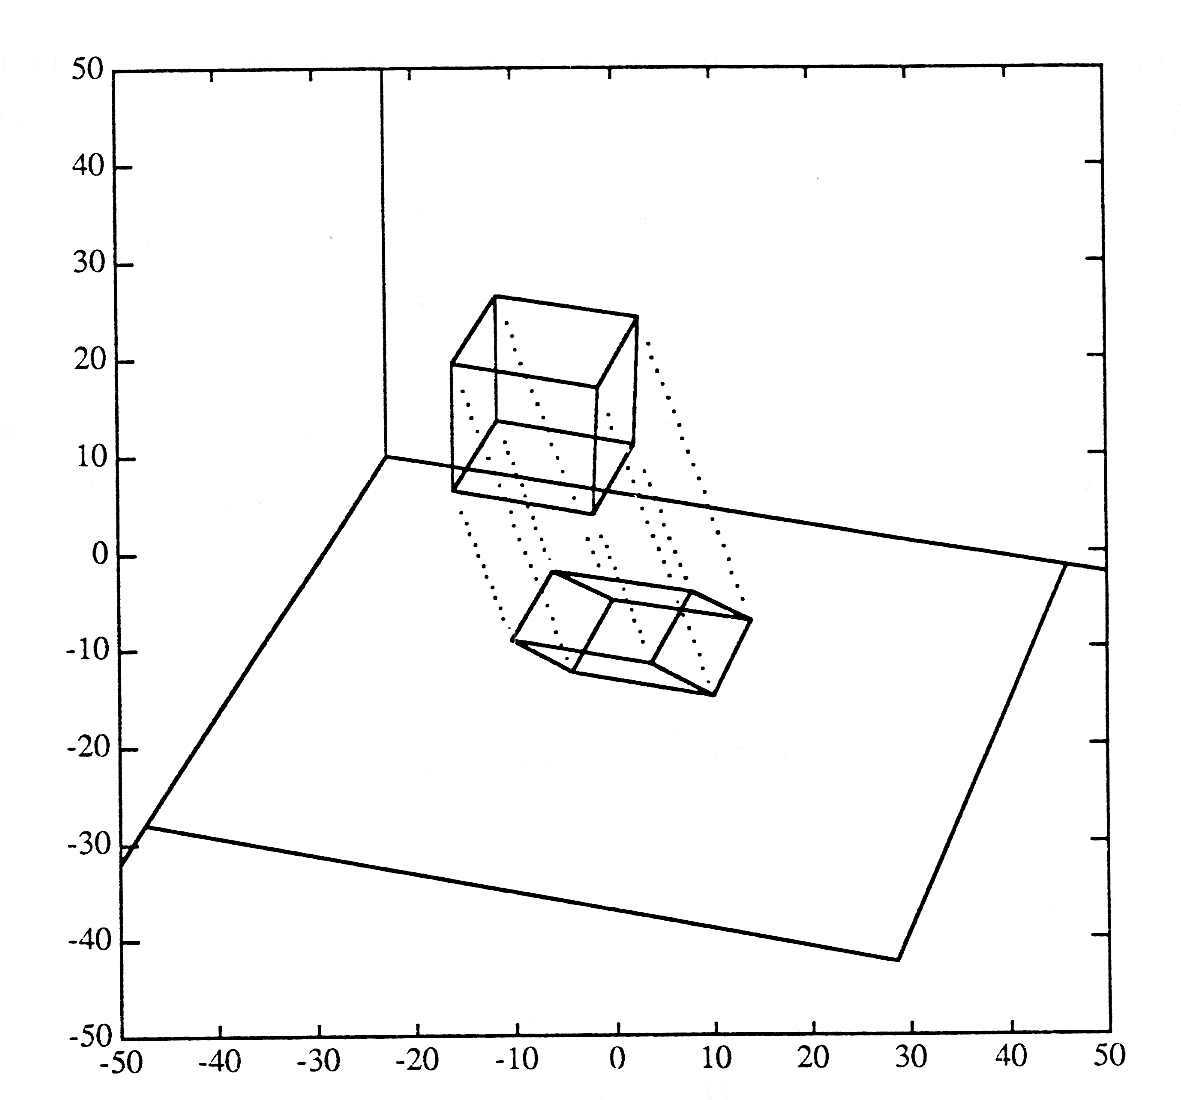 Figure one shows a rectangular prism hanging in three-dimensional space, and dashed lines showing the projection of the vertices of the object down to the x-y plane.